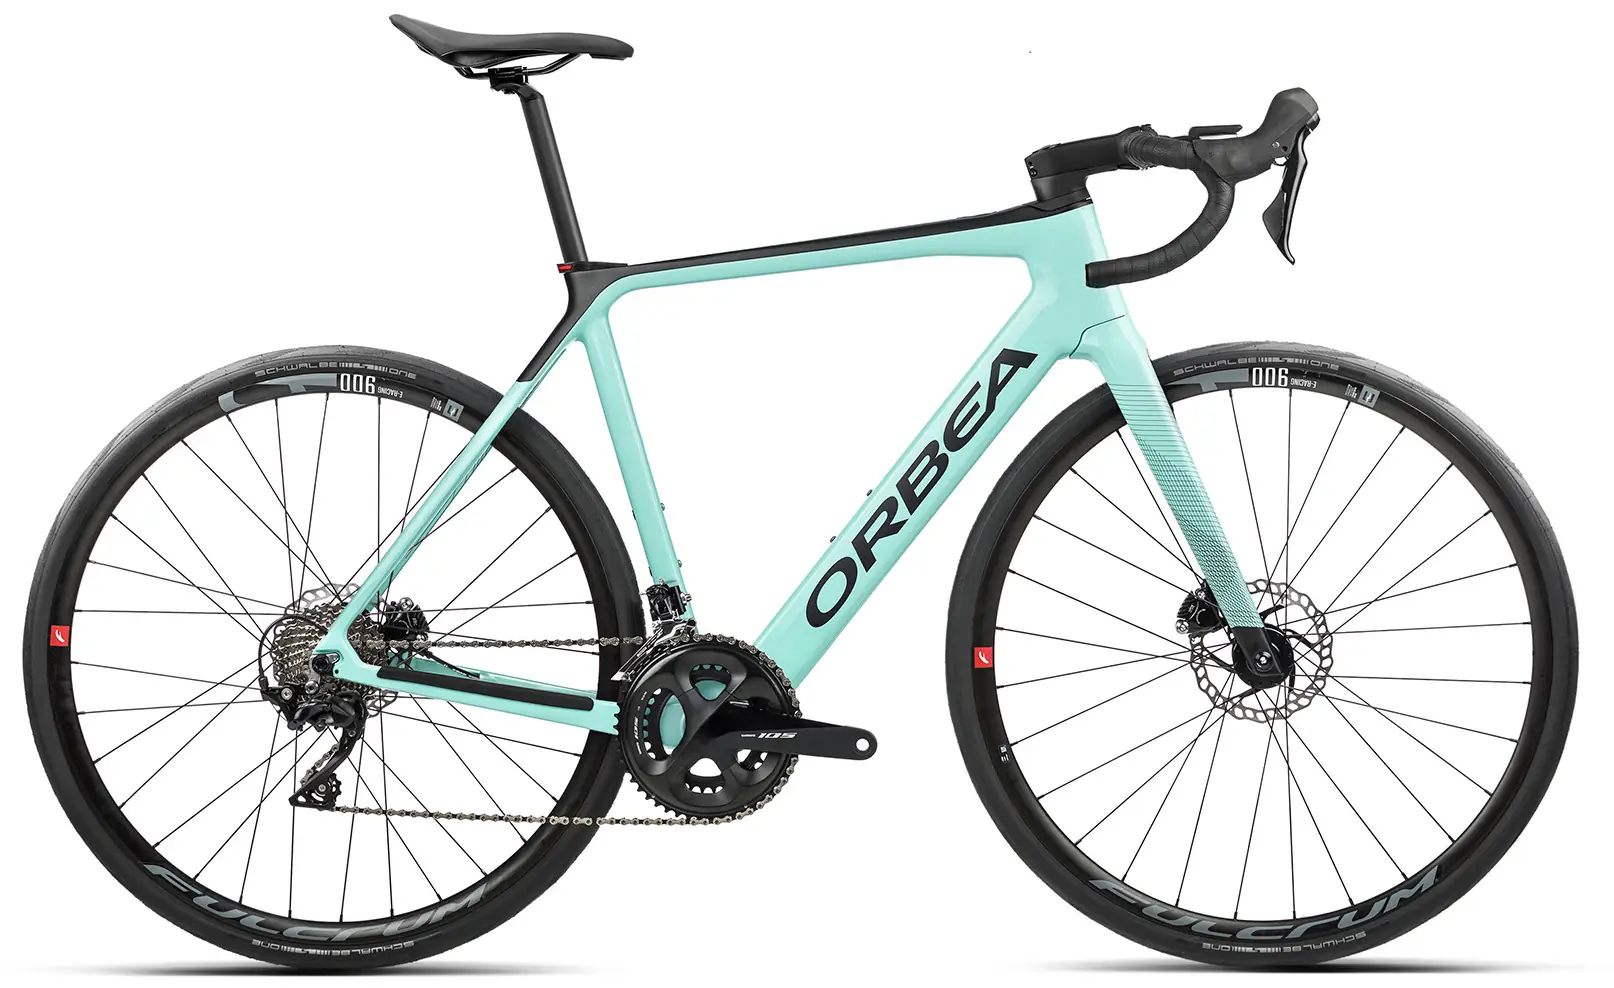 Orbea Gain M30 Electric Road Bike Lightweight Carbon Frame Turquoise M 52cm